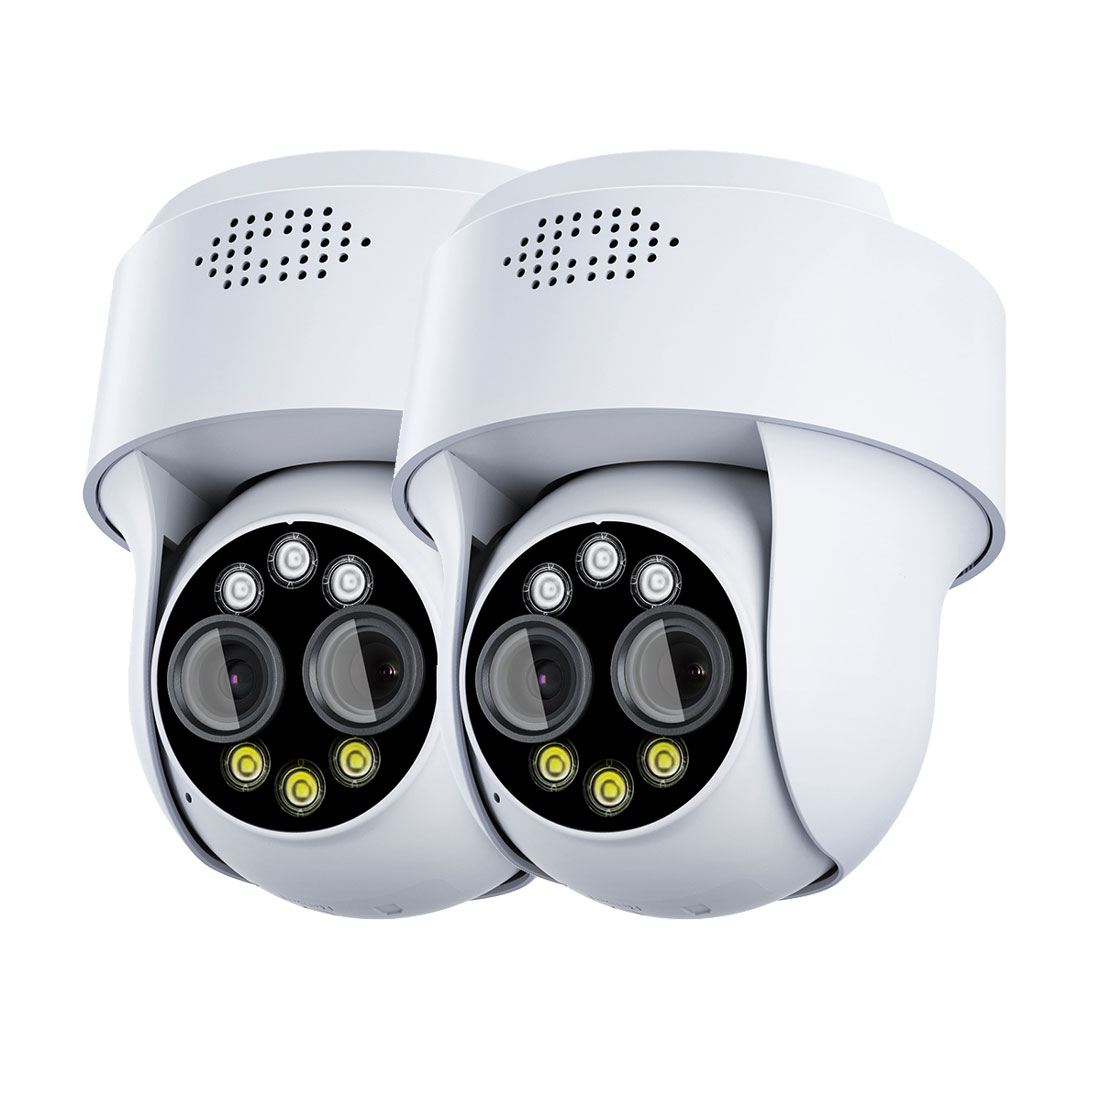 2x Microseven Professional Open Source Security Camera, Remote Managed, 4X Auto Zoom (PTZ), Auto Tracking, 4MP (2560x1440P), PoE + WiFi (2.4/5GHz), Smart Motion Detection, Indoor & Outdoor (IP 65), IR On/Off Color Night Vision, 256GB Storage avail, 2-Way Audio, ONVIF, Web GUI & Apps, CMS (Camera Management System), M7RSS (Video Recorder Server), Cloud Storage, Broadcasting on YouTube and Microseven